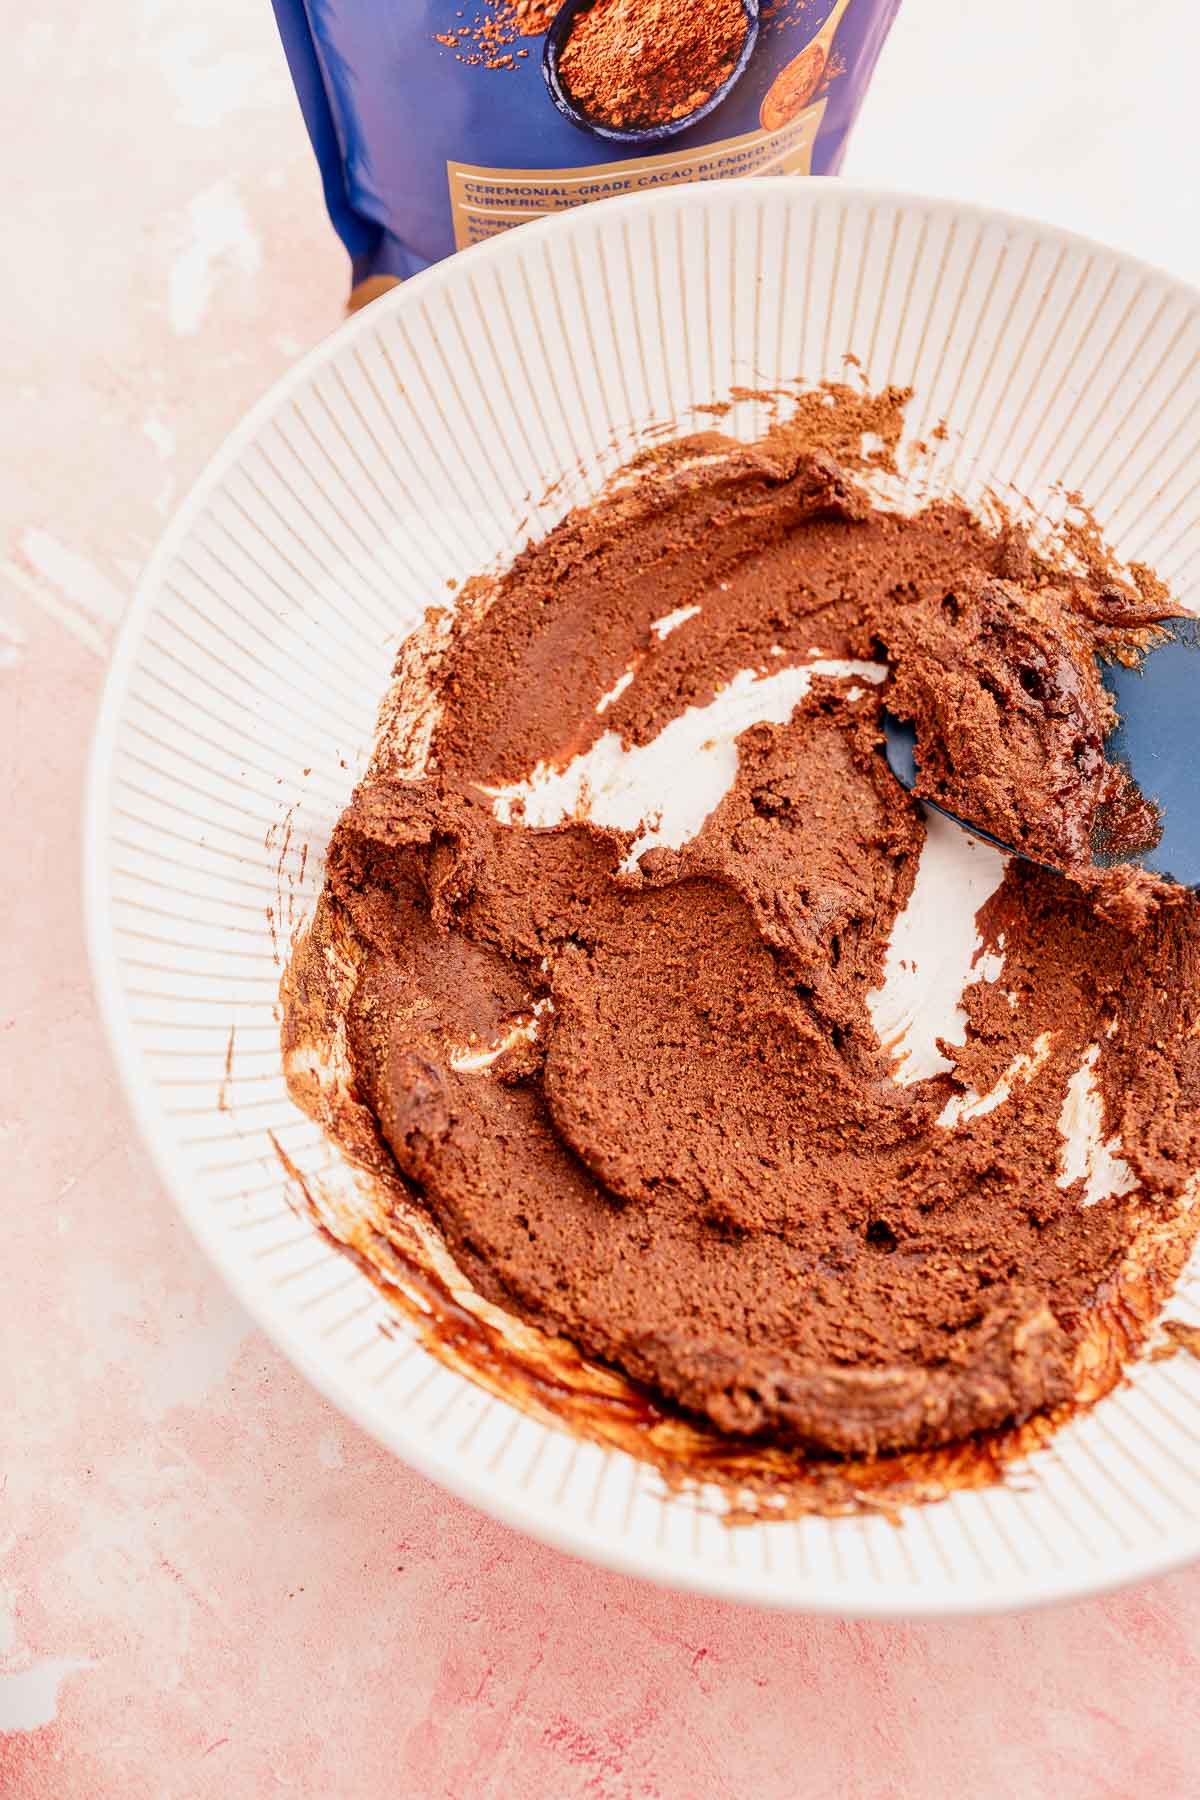 A bowl containing a chocolate and quinoa crunch bites mixture with a spatula, next to an open packet of cocoa powder on a pink surface.